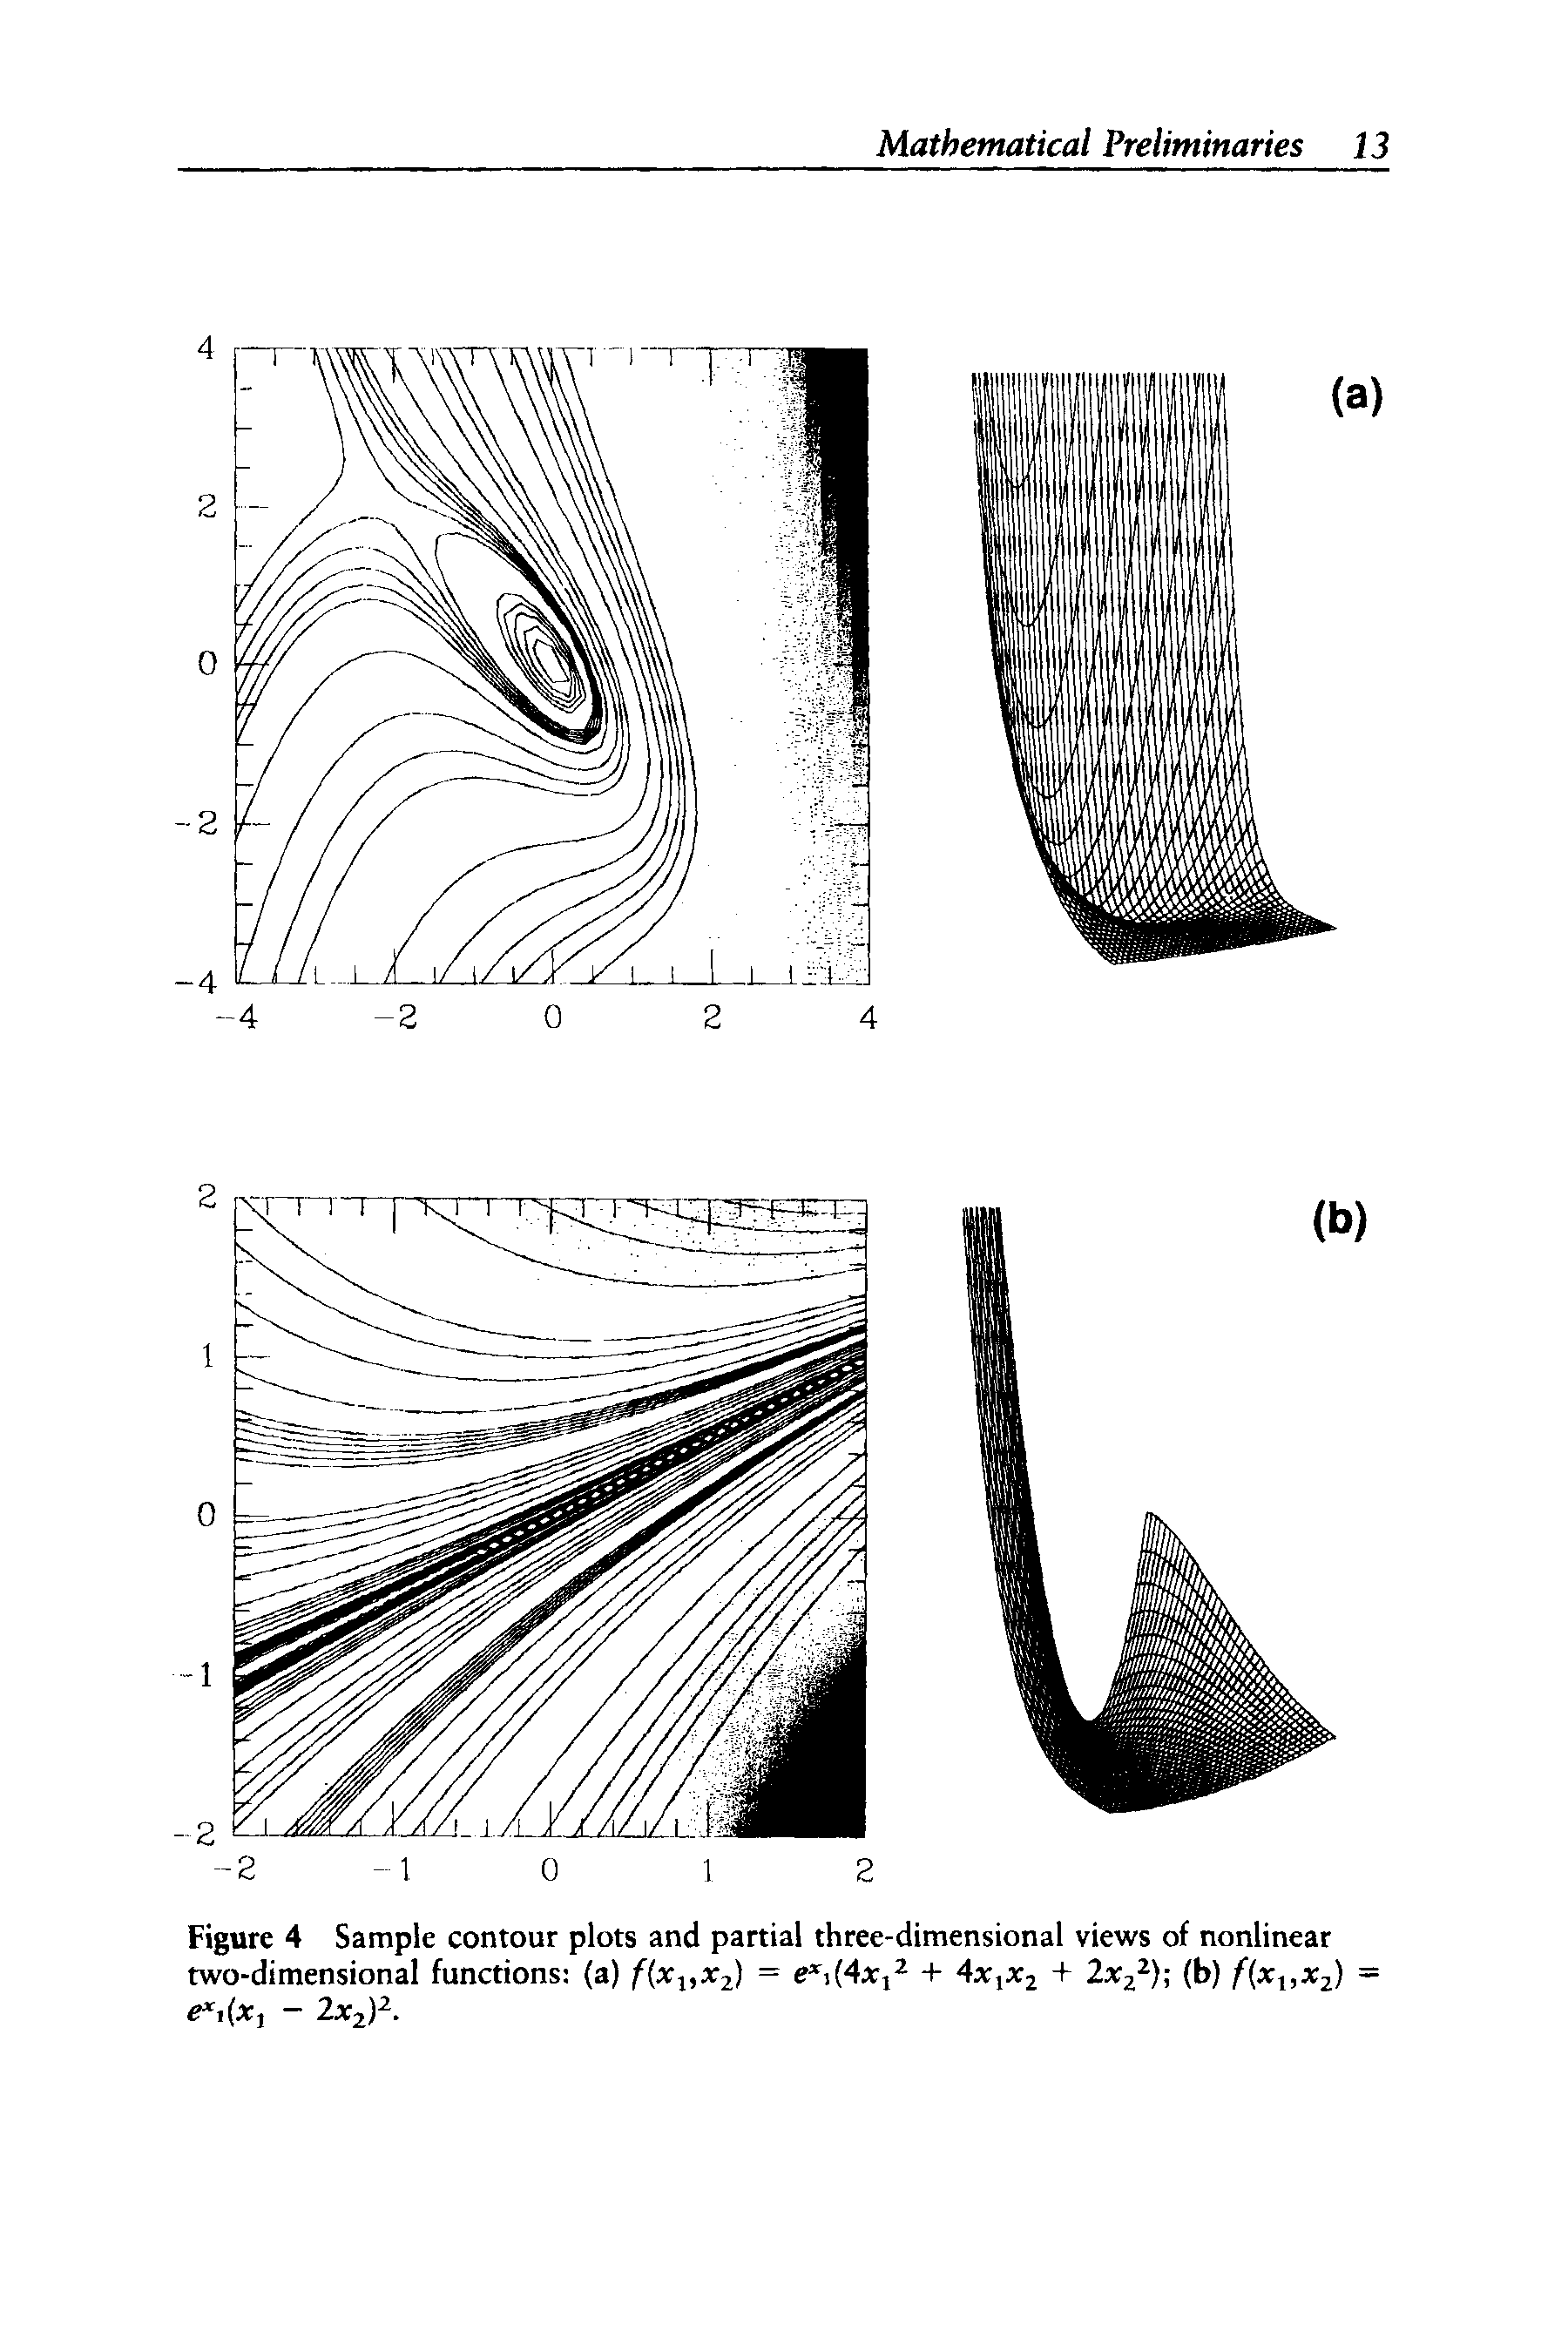 Figure 4 Sample contour plots and partial three-dimensional views of nonlinear two-dimensional functions (a) f(x1,x2) = exi(4x12 + 4xlx2 + 2xzz) (b) f(xux2) = ext(xi - lx2)2.